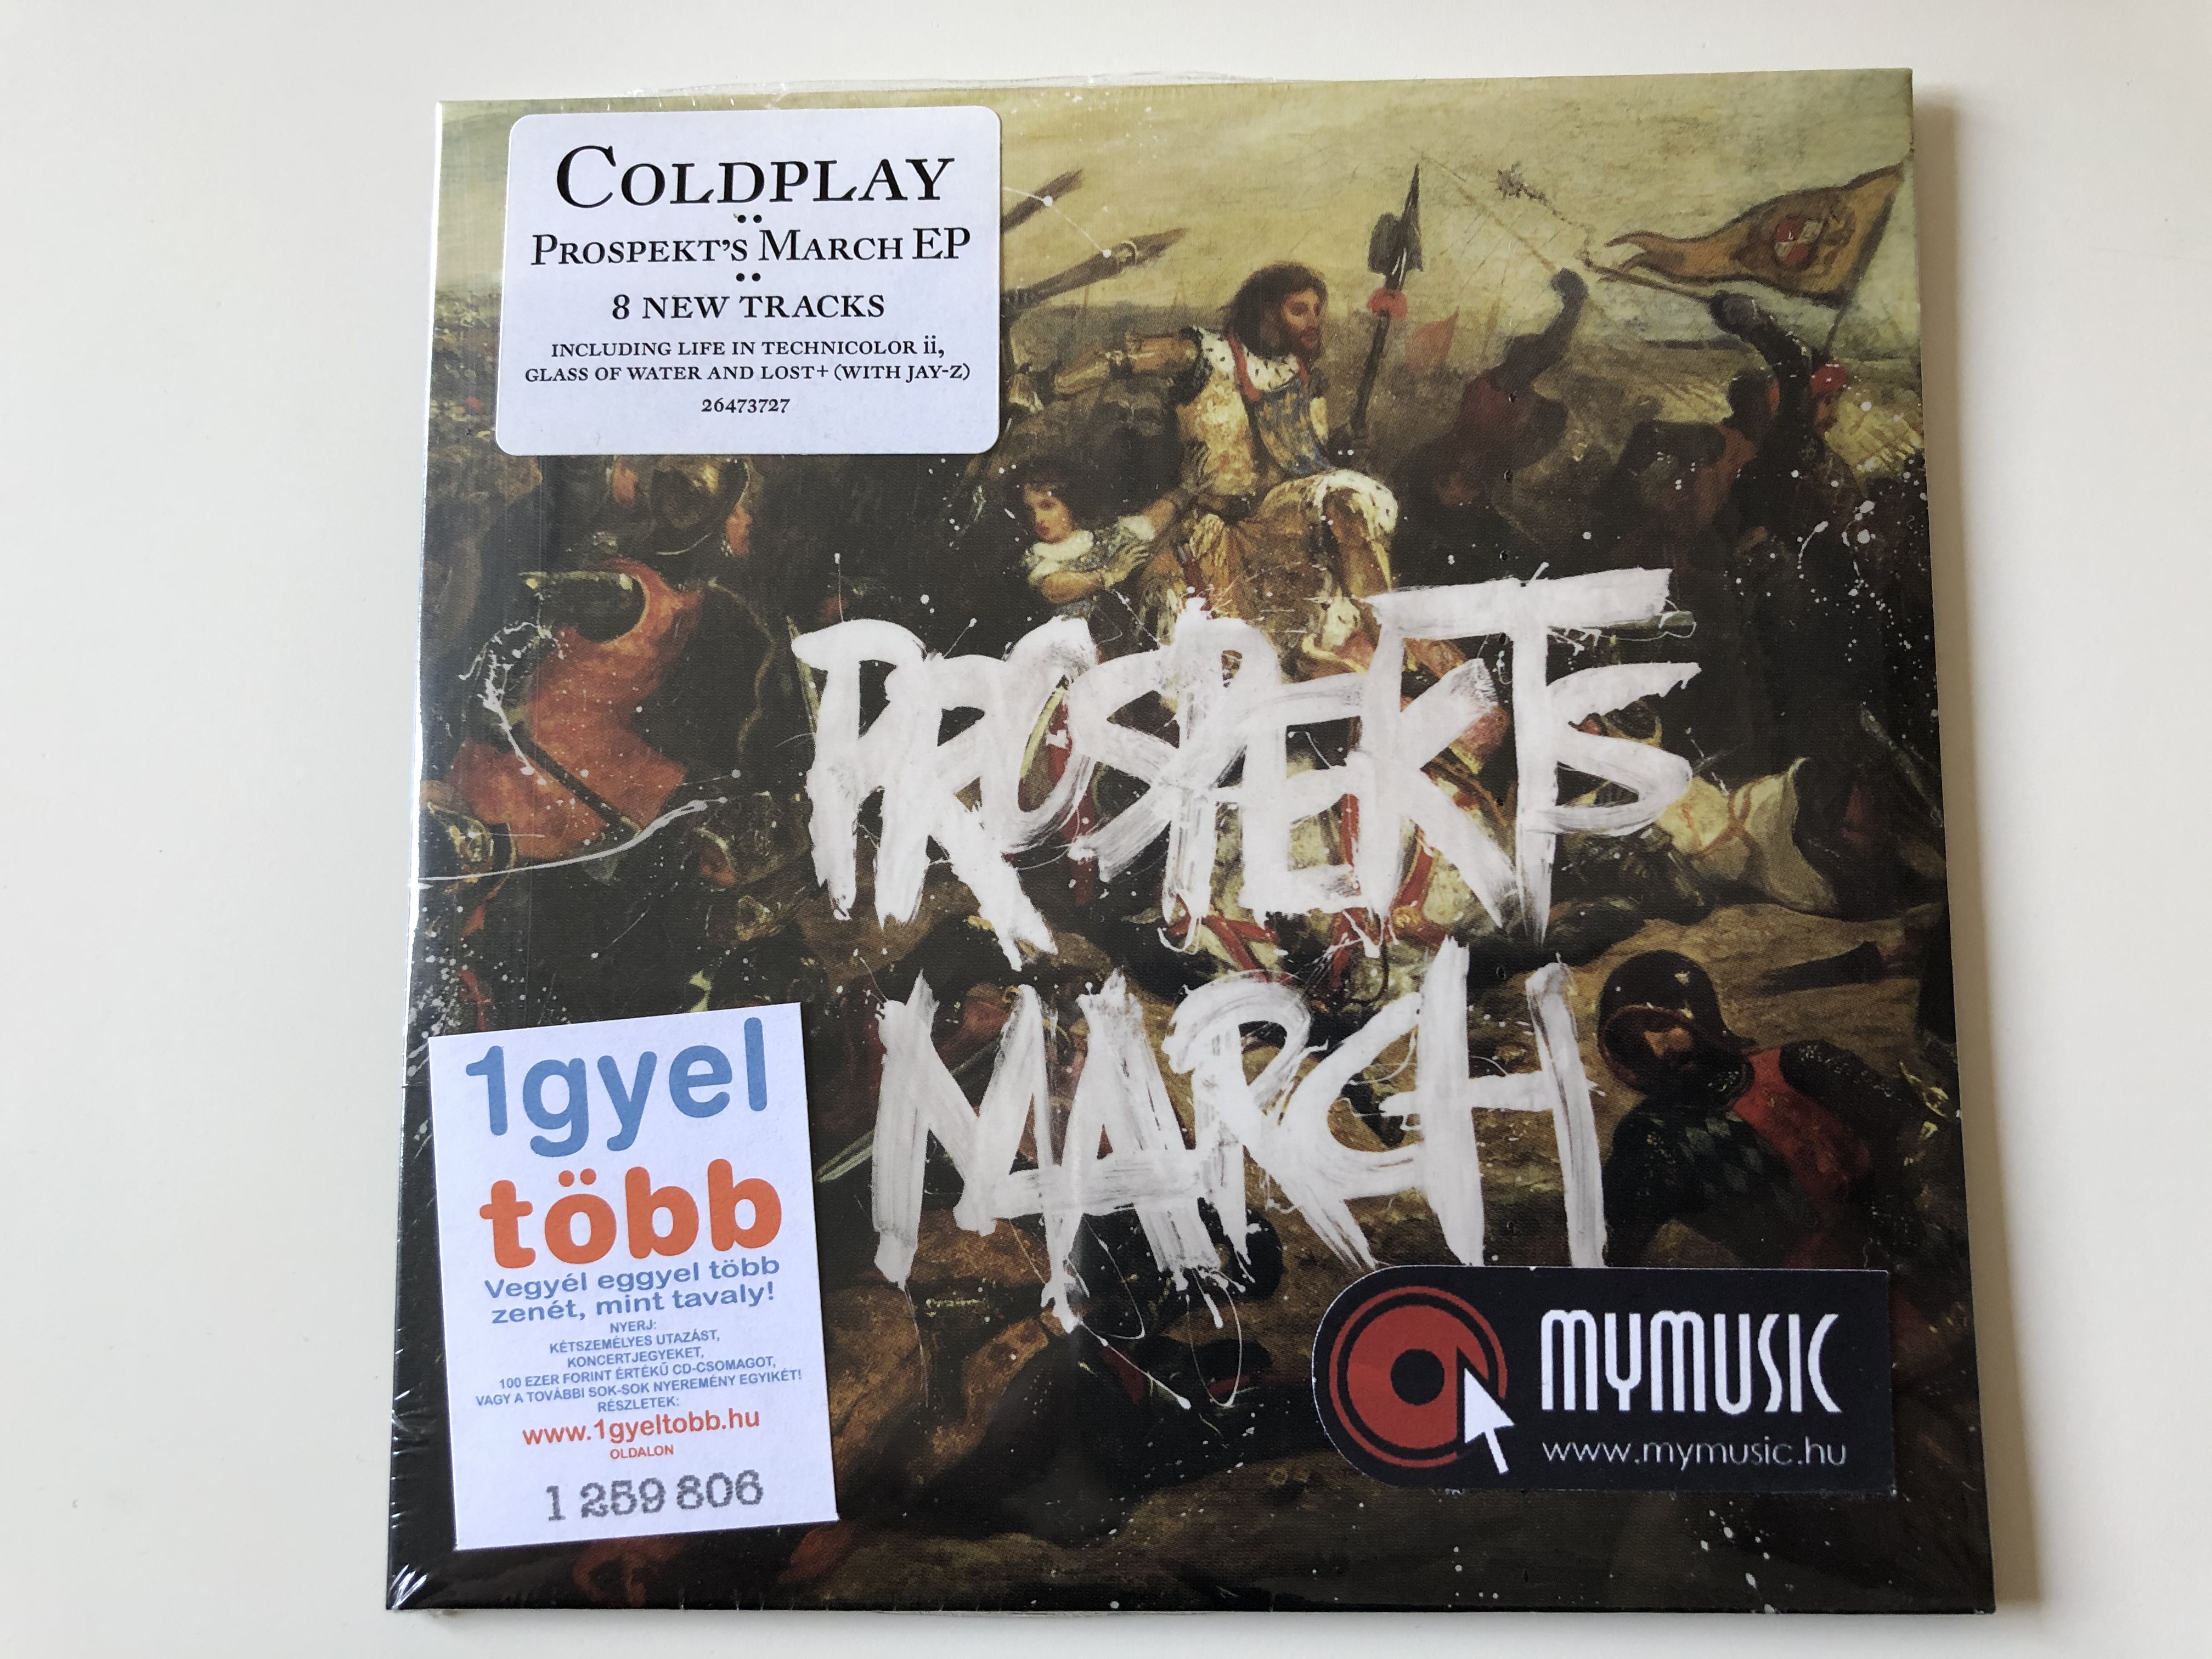 Coldplay ‎– Prospekt's March EP / 8 New Tracks, Including Life In  Technicolor ii, Glass of Water and Lost + (With Jay-Z) / Parlophone Audio  CD 2008 / 5099926473727 - bibleinmylanguage